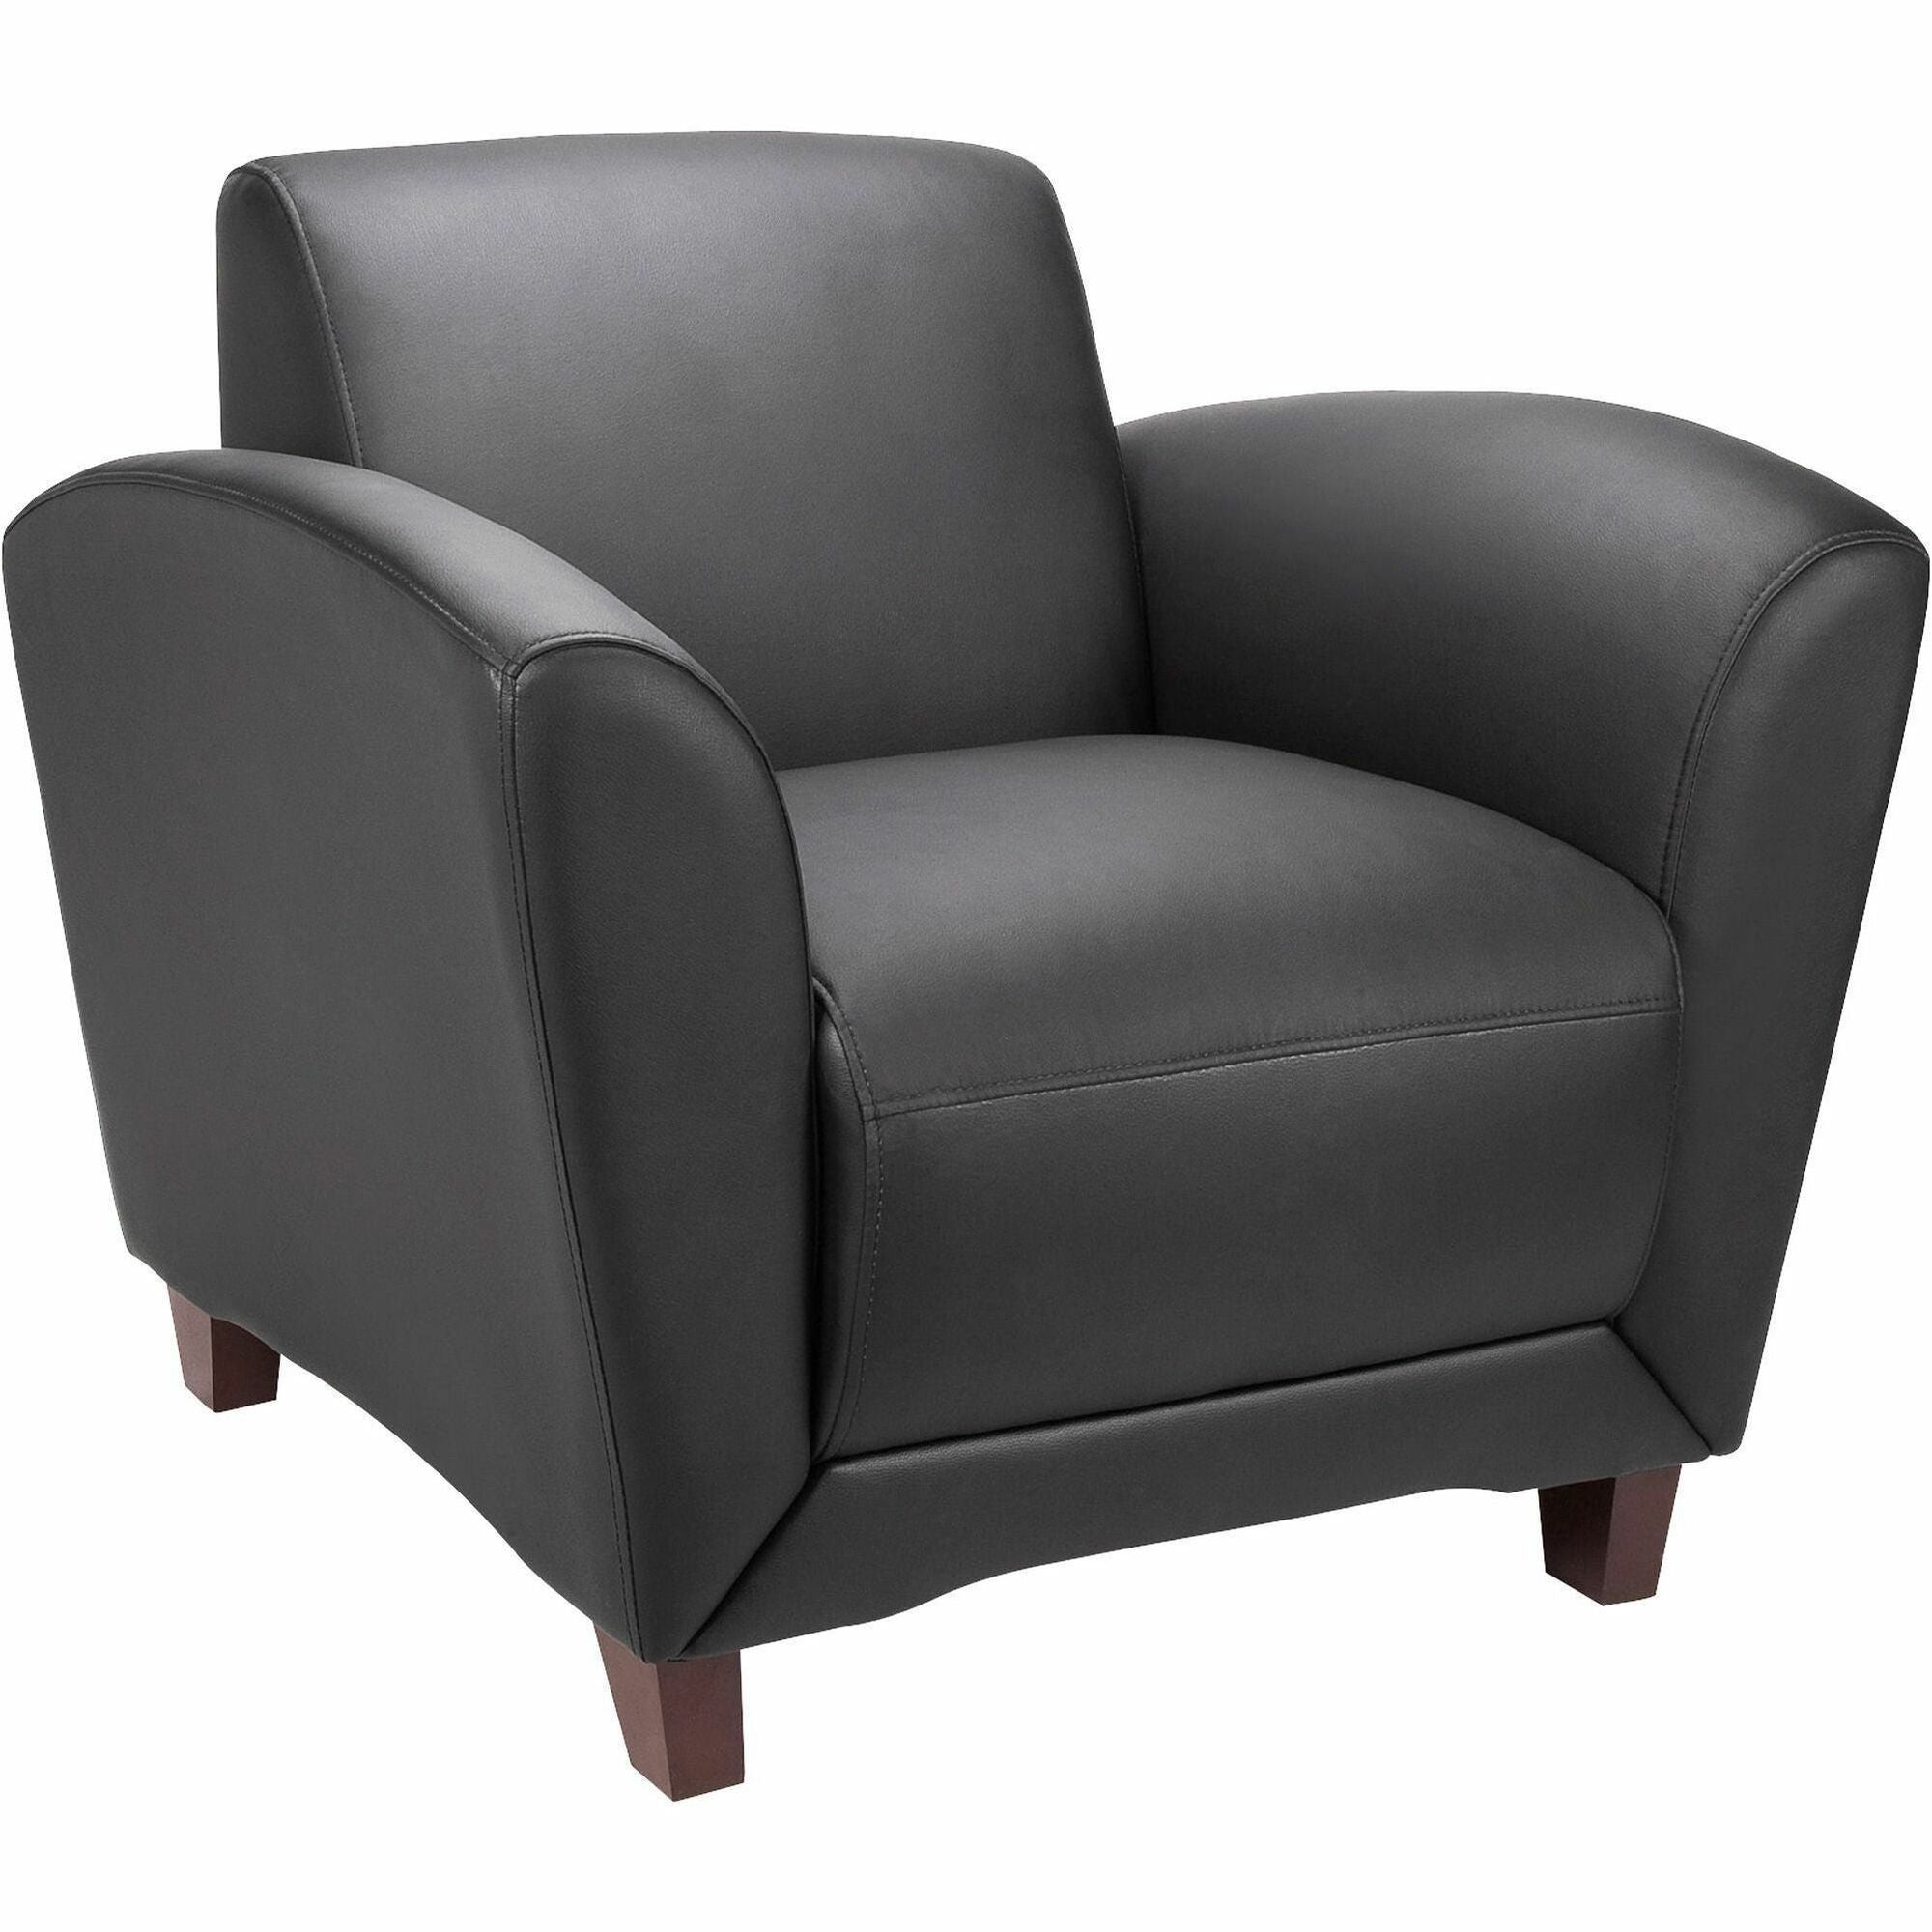 Lorell Accession Club Chair - Black Leather Seat - Black Leather Back - Four-legged Base - 1 Each - 